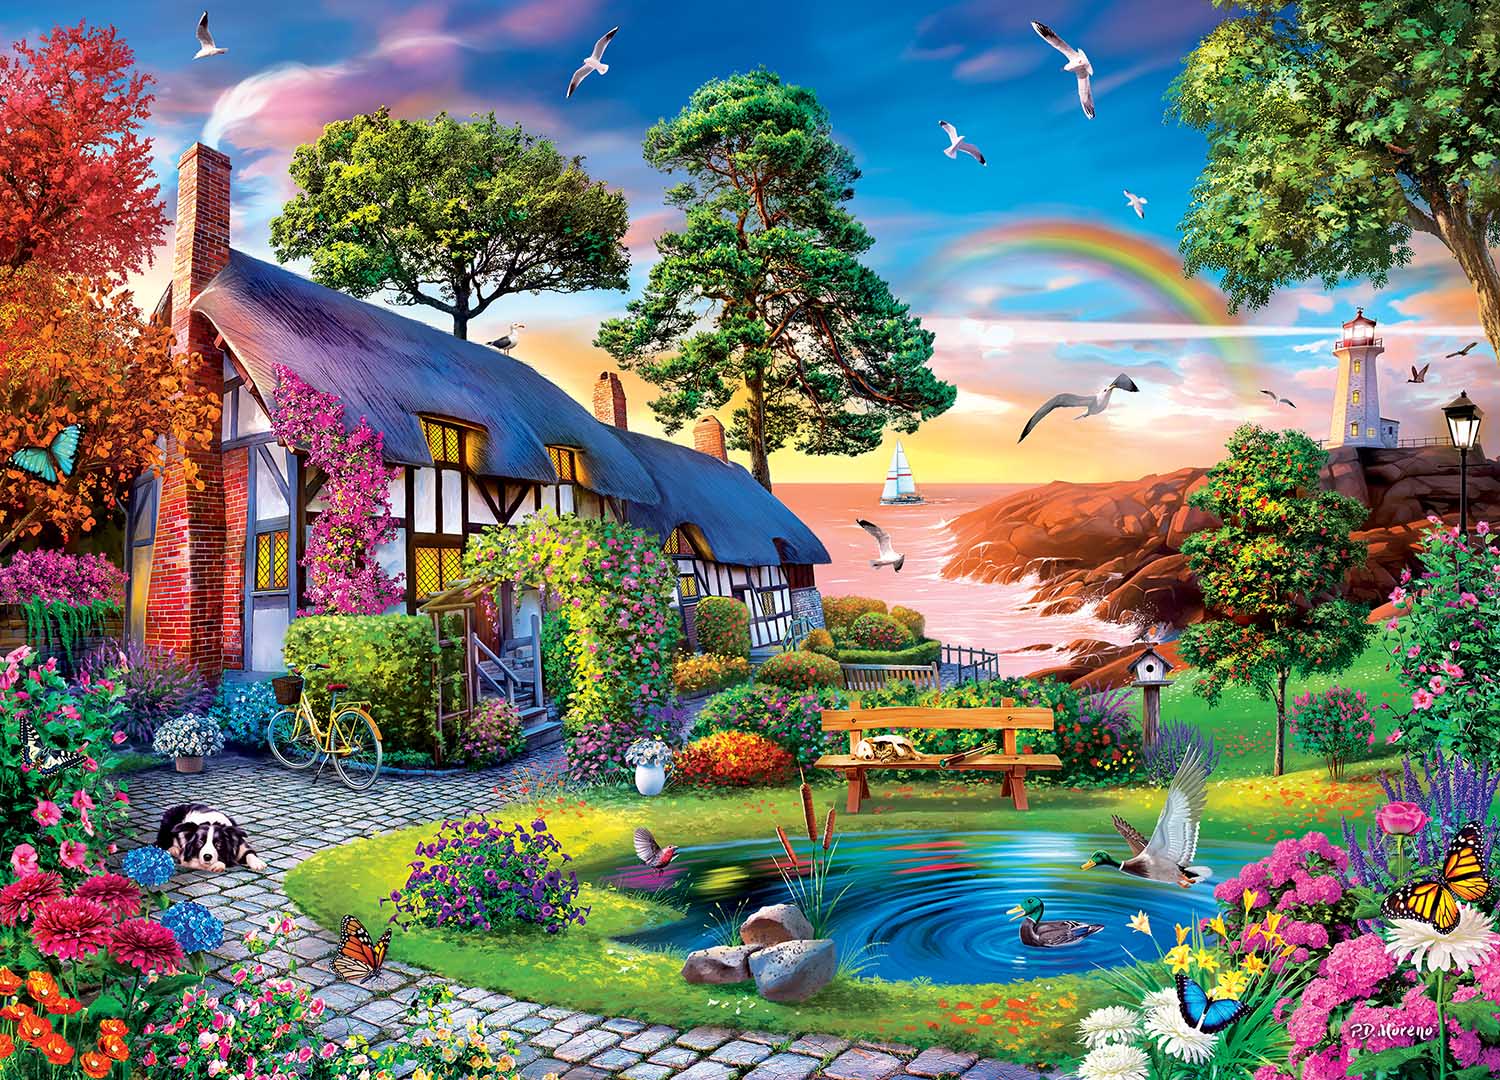 Over the Rainbow Lakes & Rivers Jigsaw Puzzle